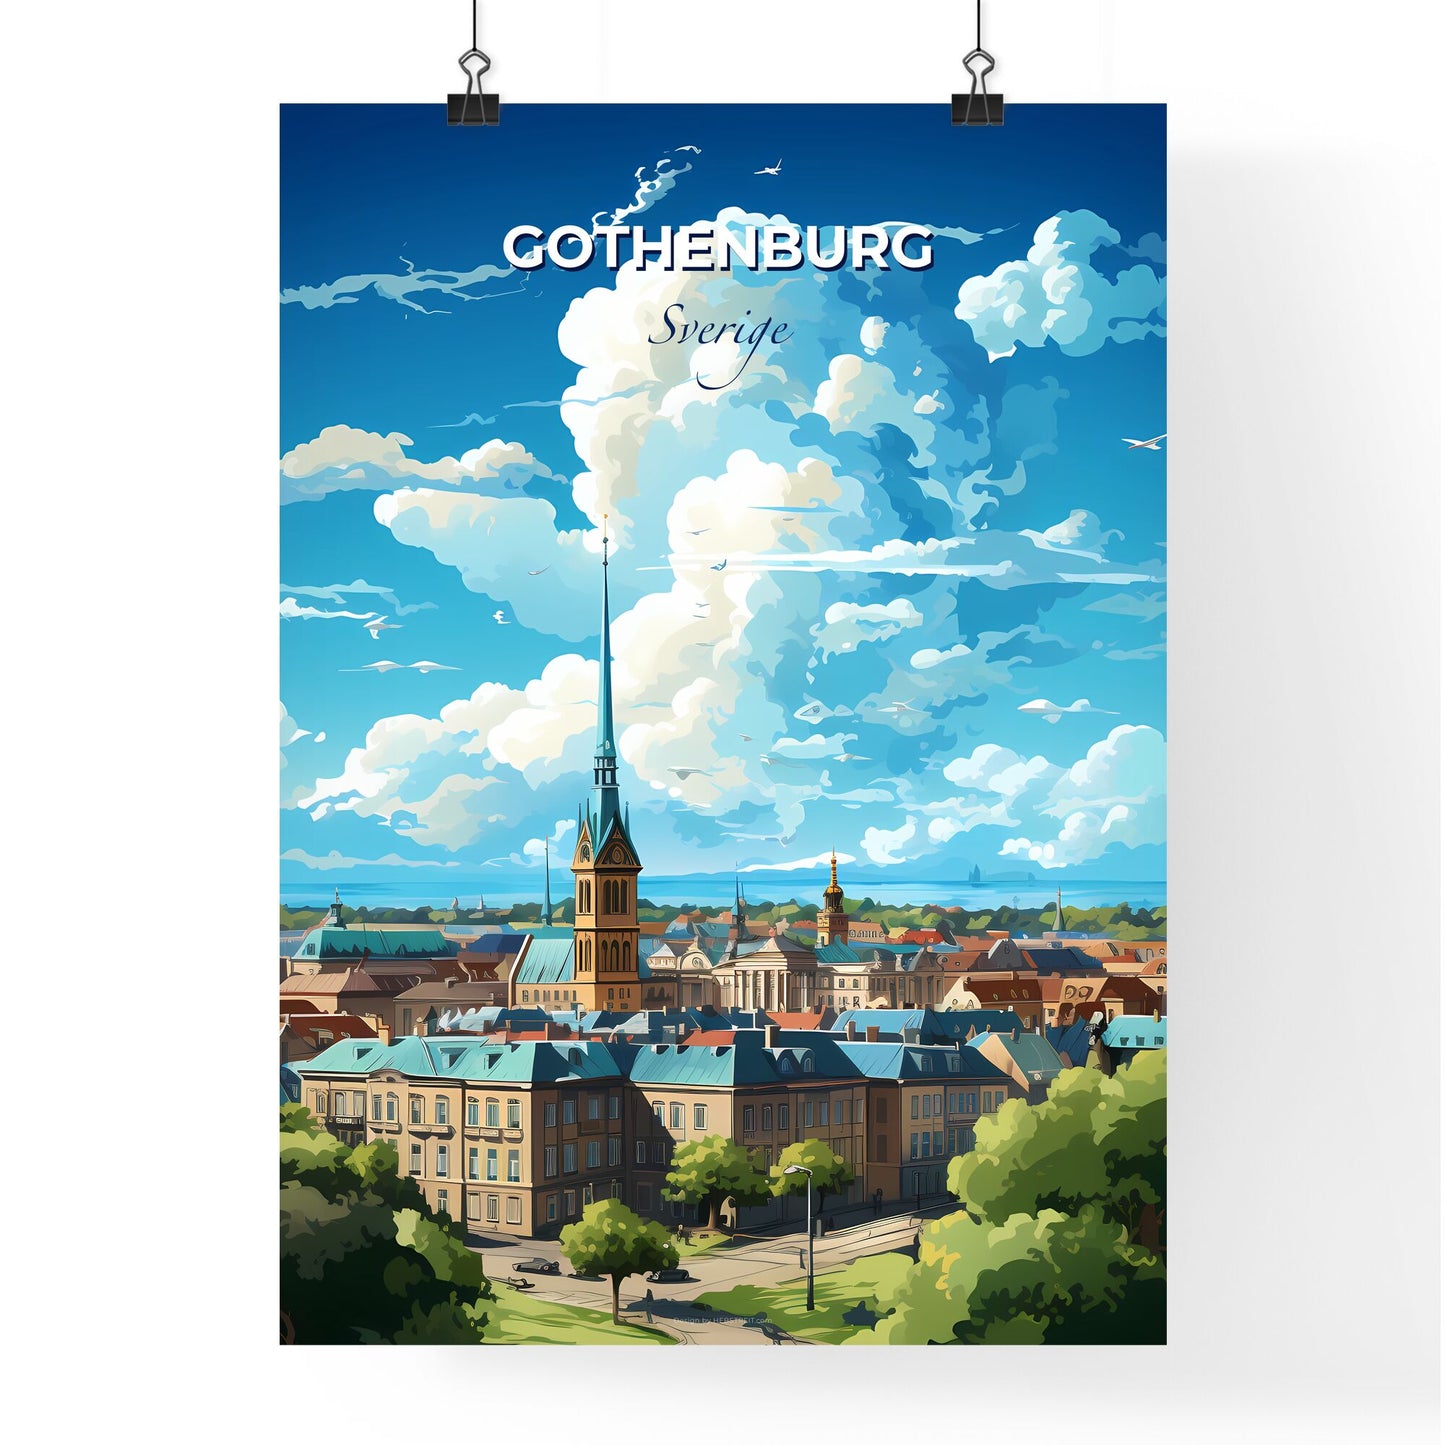 Gothenburg Sverige Skyline - A City With A Tall Spire - Customizable Travel Gift Default Title